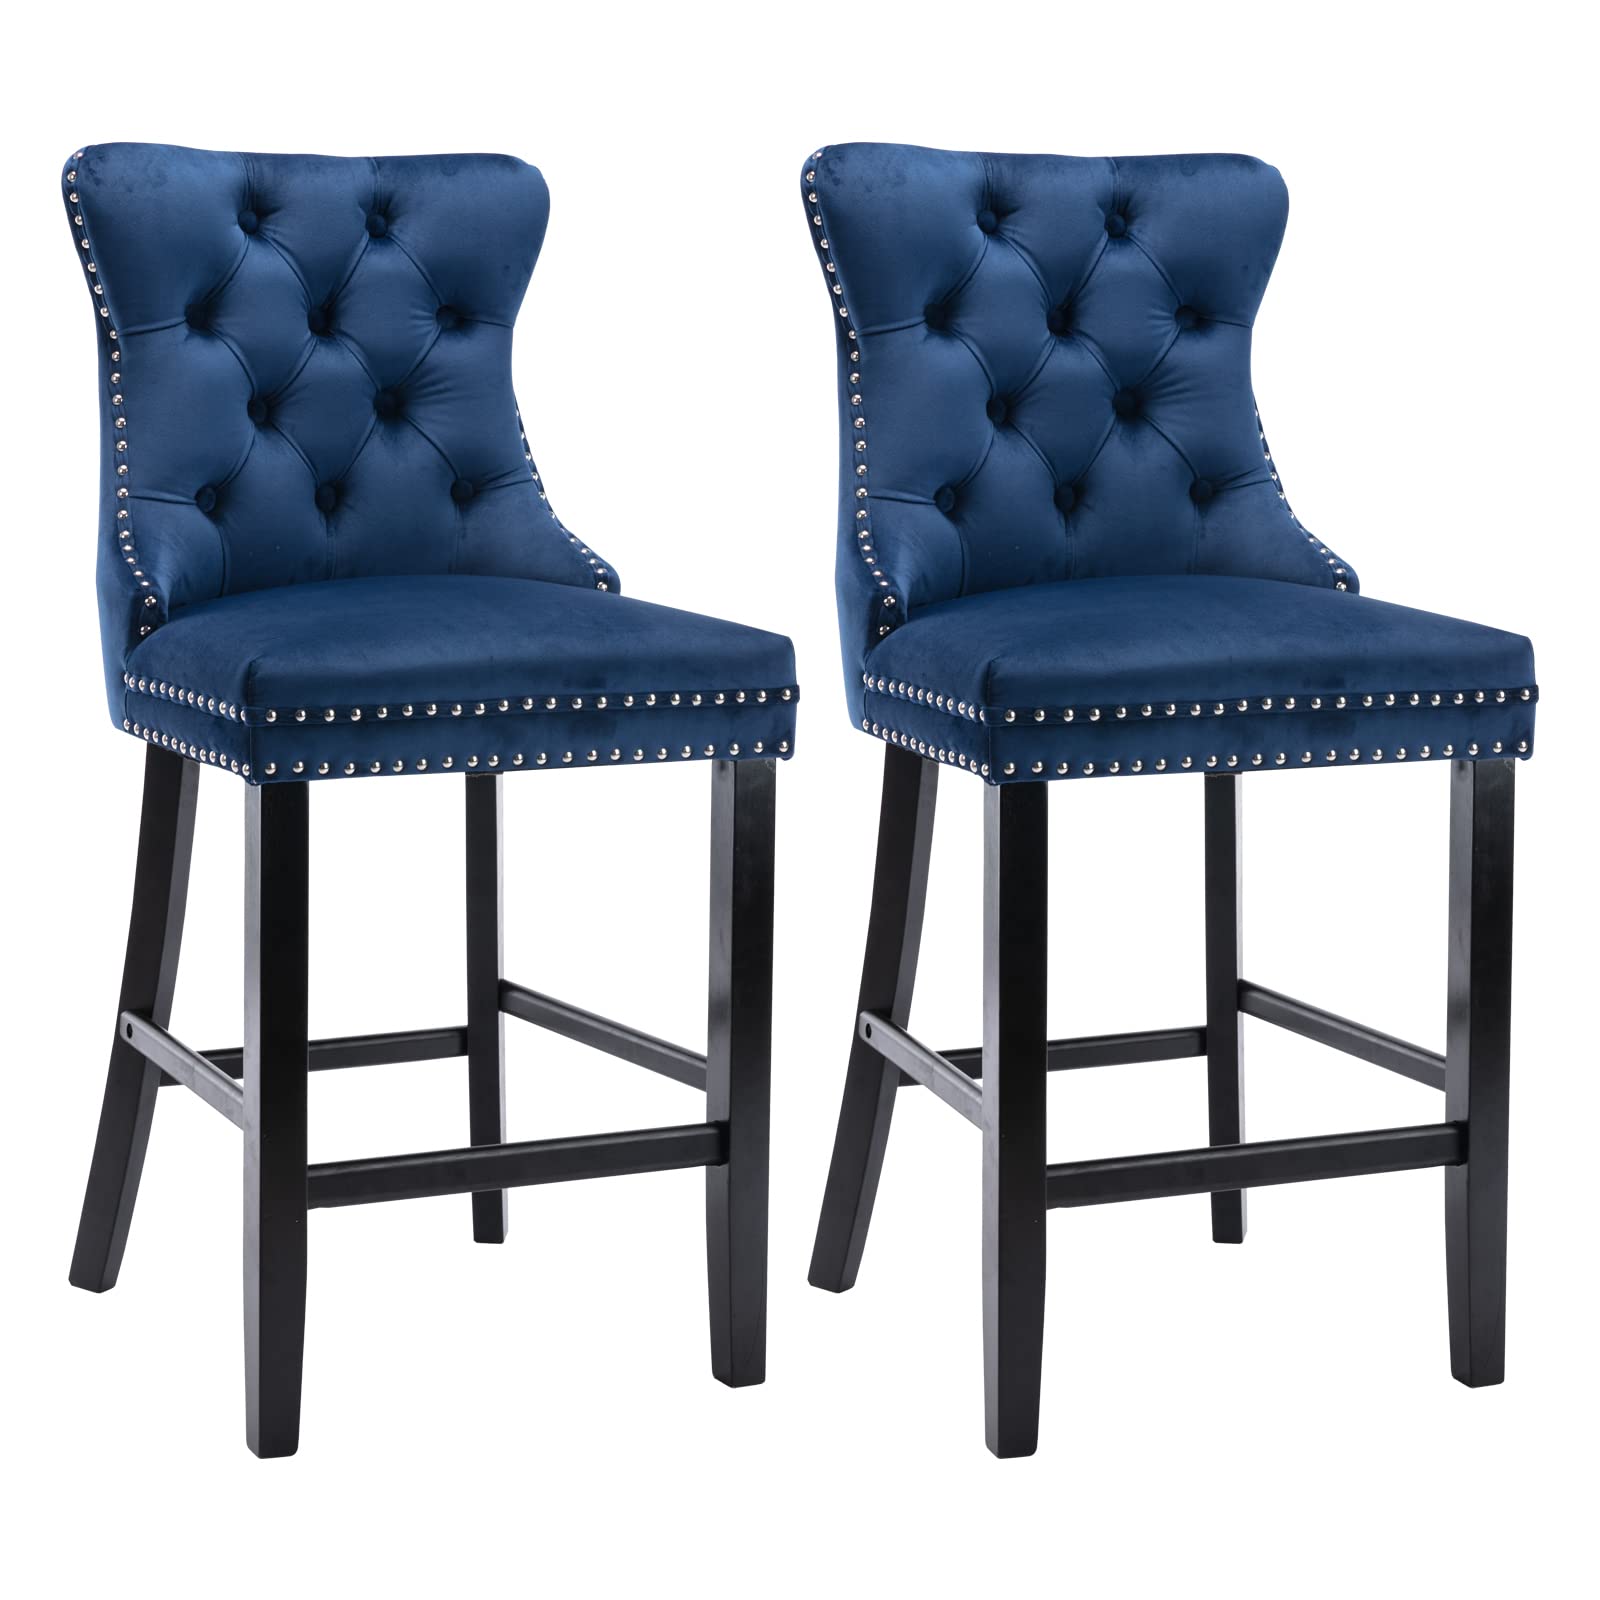 2X Velvet Bar Stools with Studs Trim Wooden Legs Tufted Dining Chairs Kitchen - image24